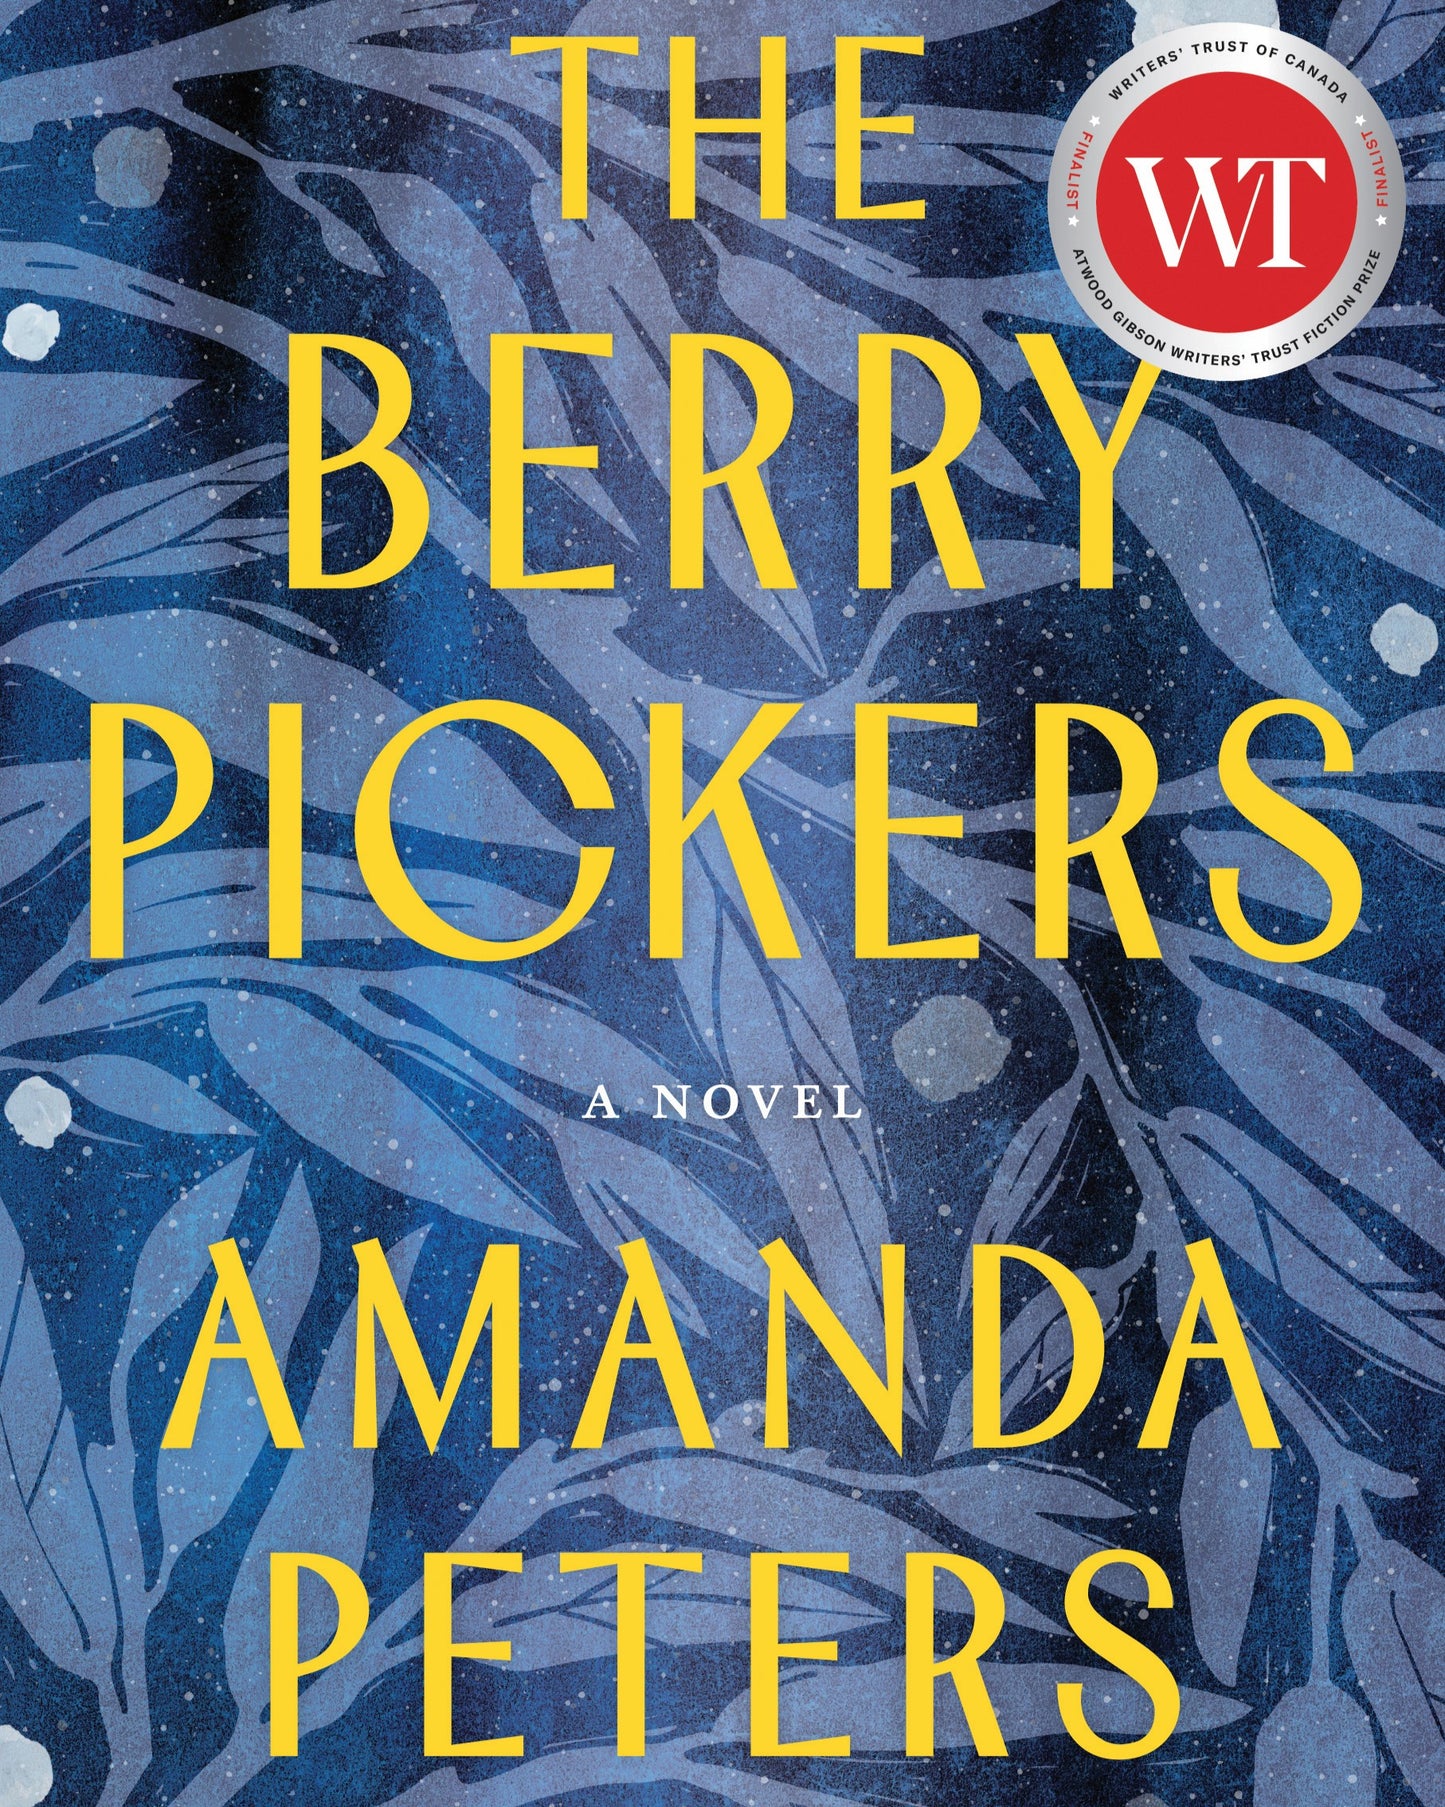 The Berry Pickers, A Two-Part Book Club Series